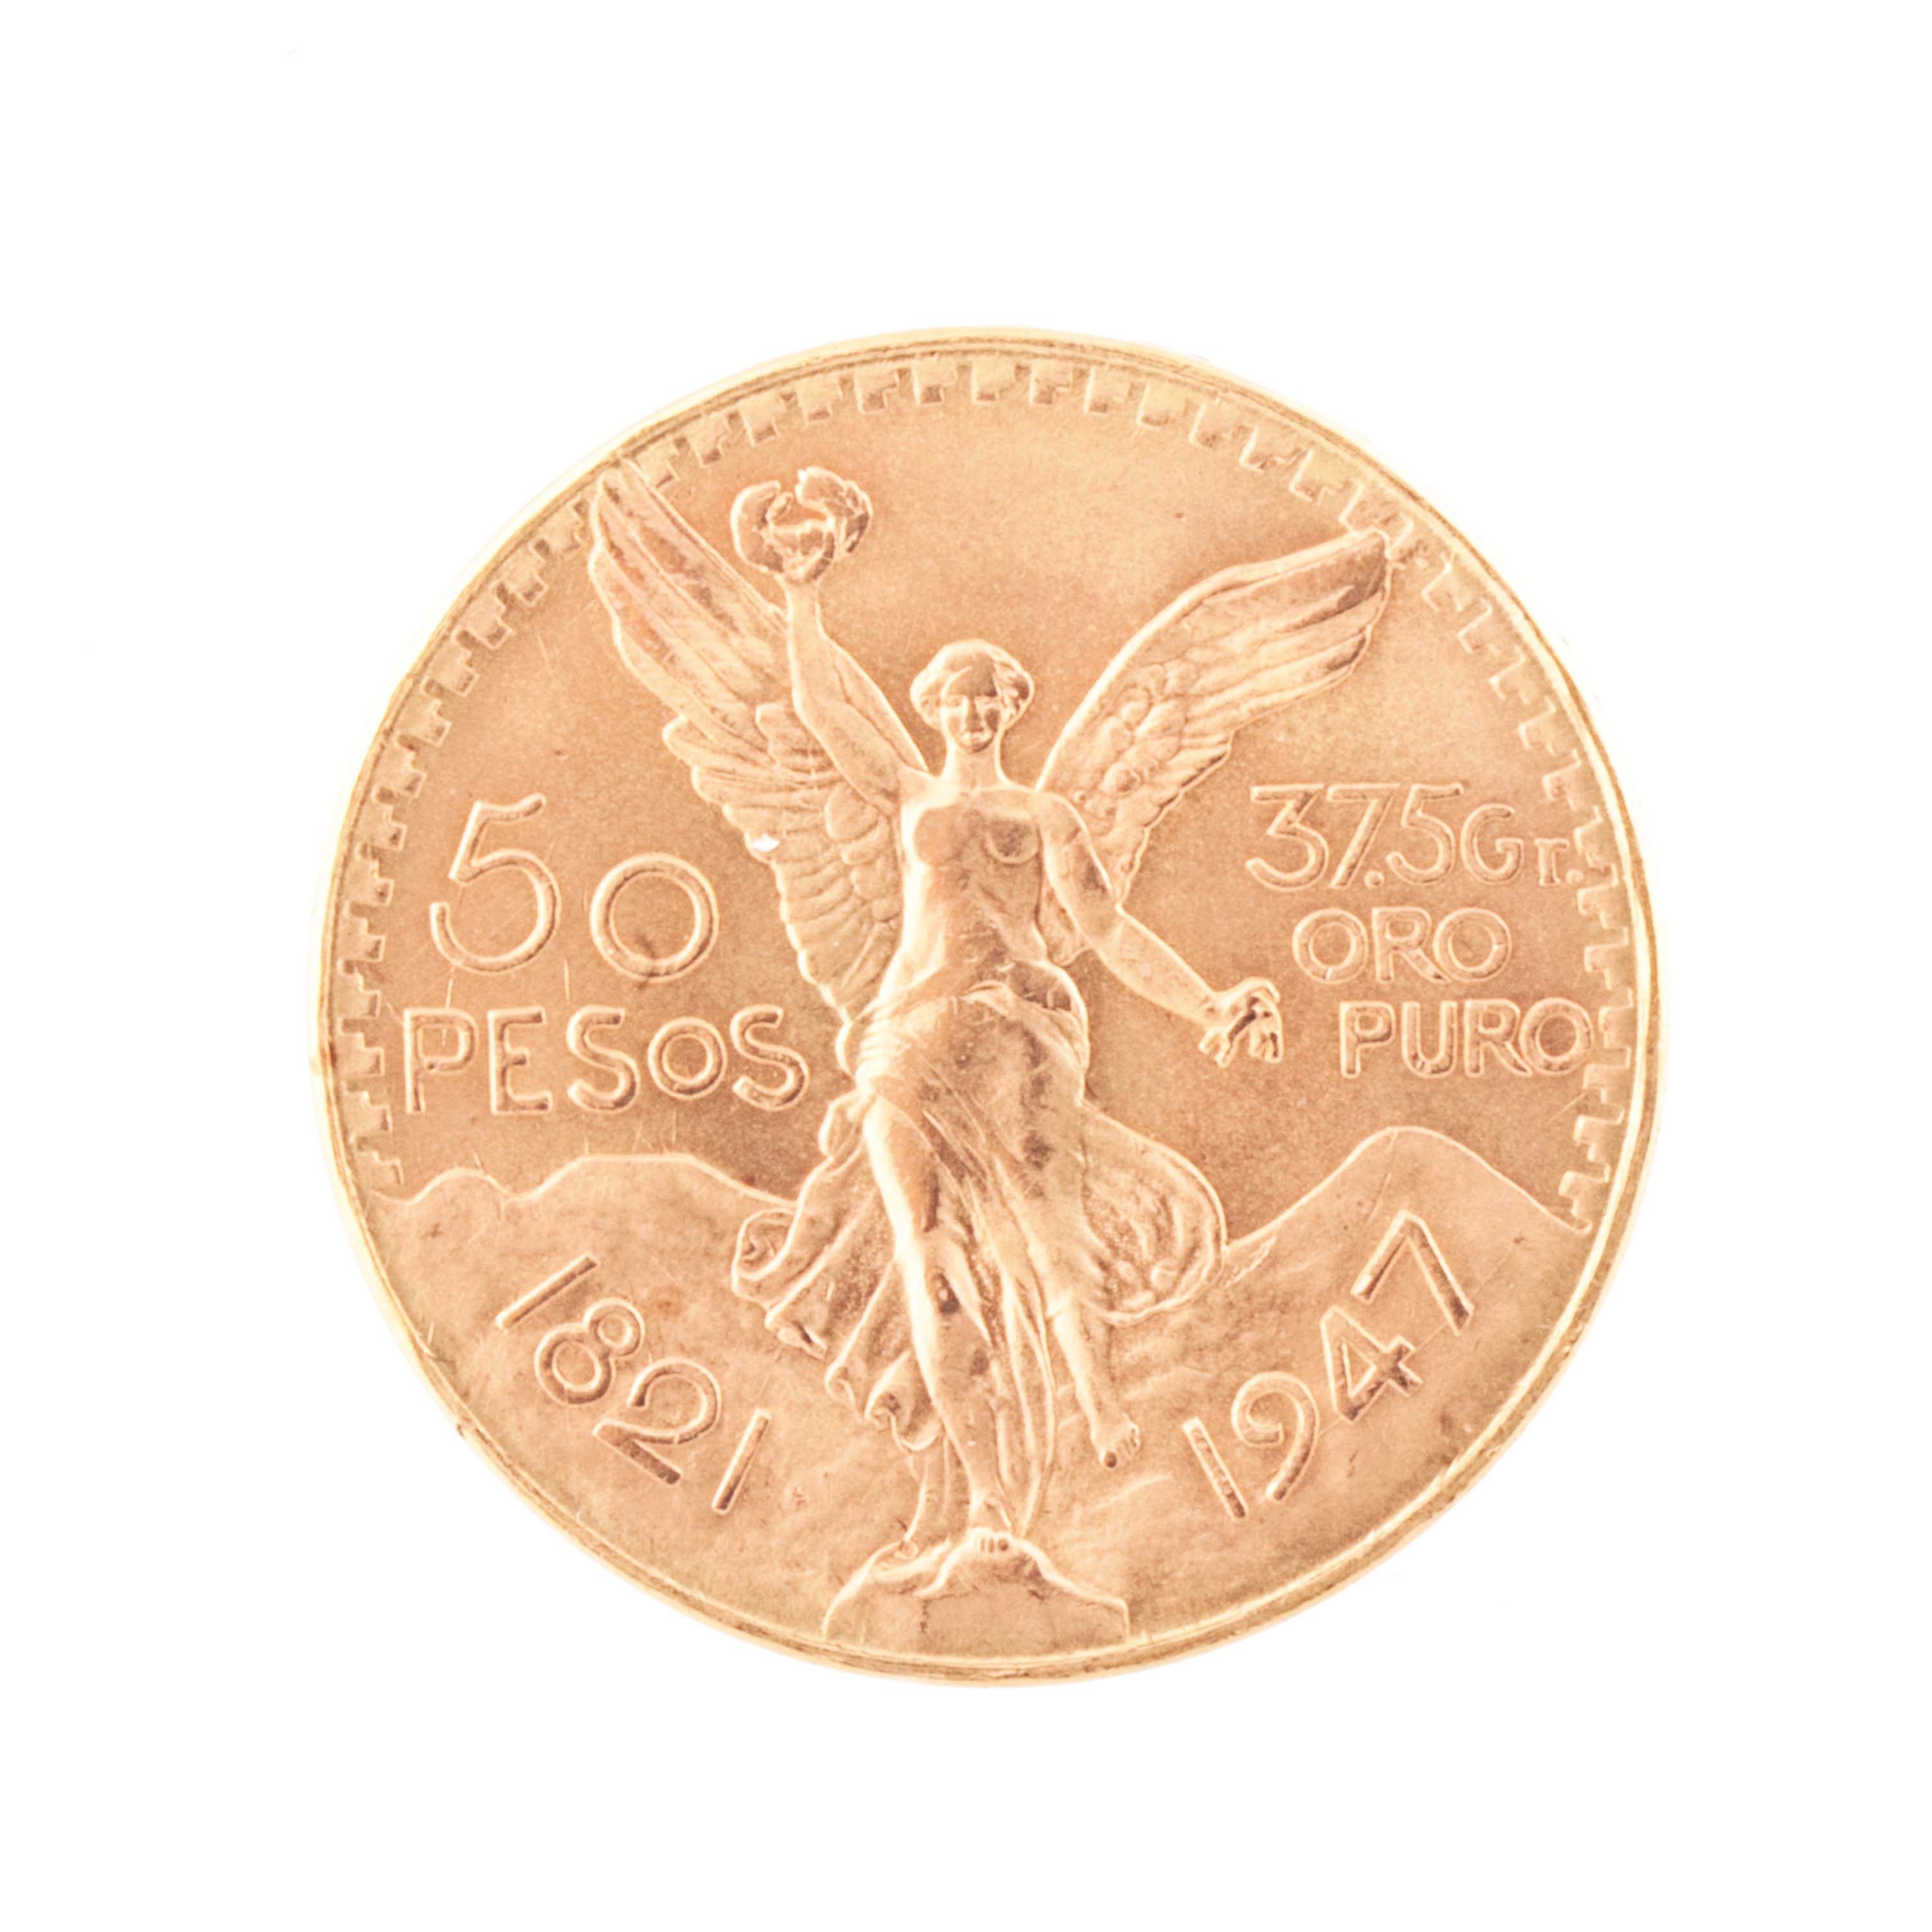 MEXICAN FIFTY PESO GOLD COIN.